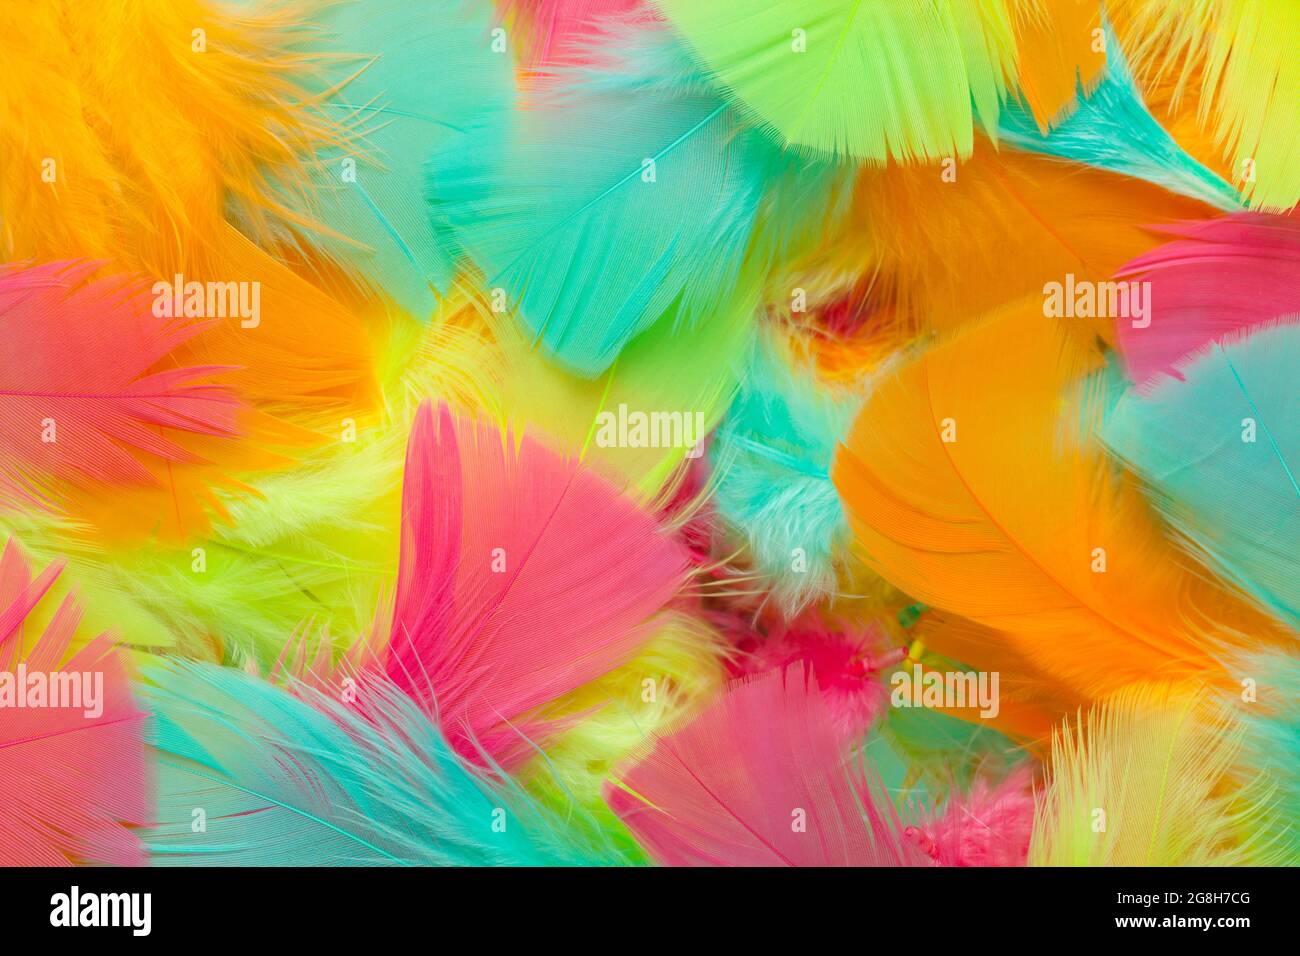 Pile of Colorful Bird Feathers Background Texture. Stock Photo